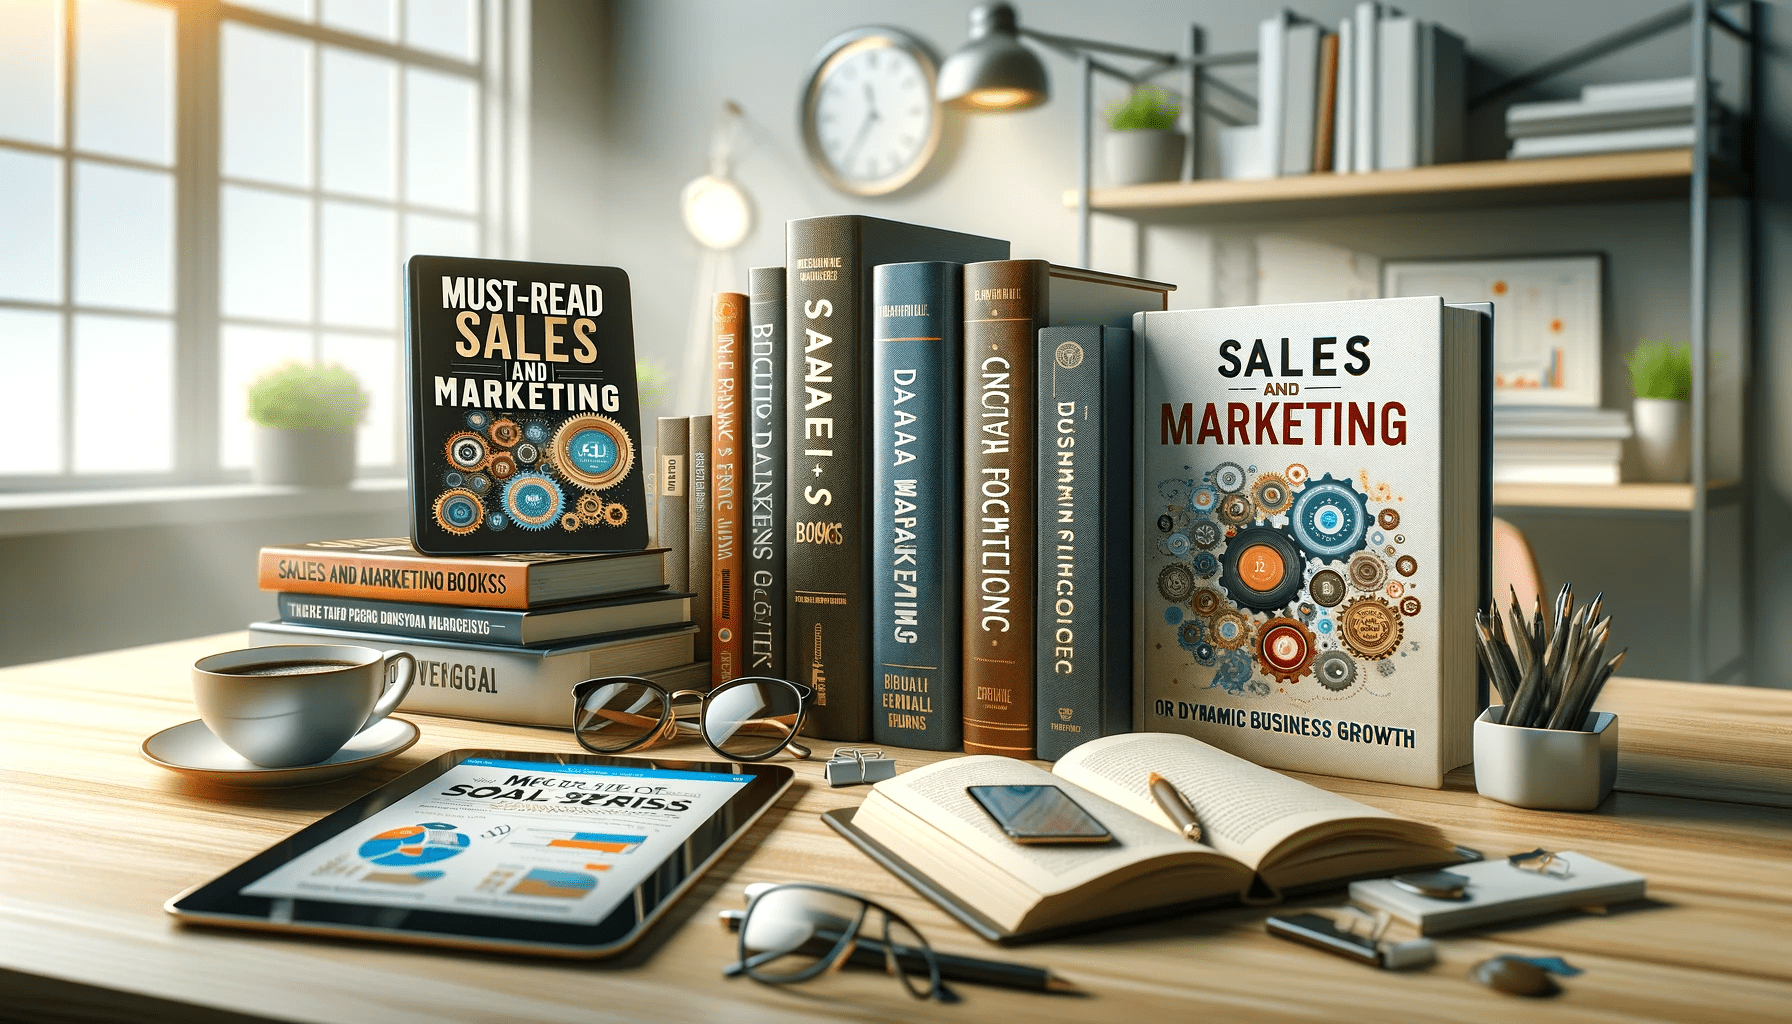 Must-Read Sales and Marketing Books for Dynamic Business Growth